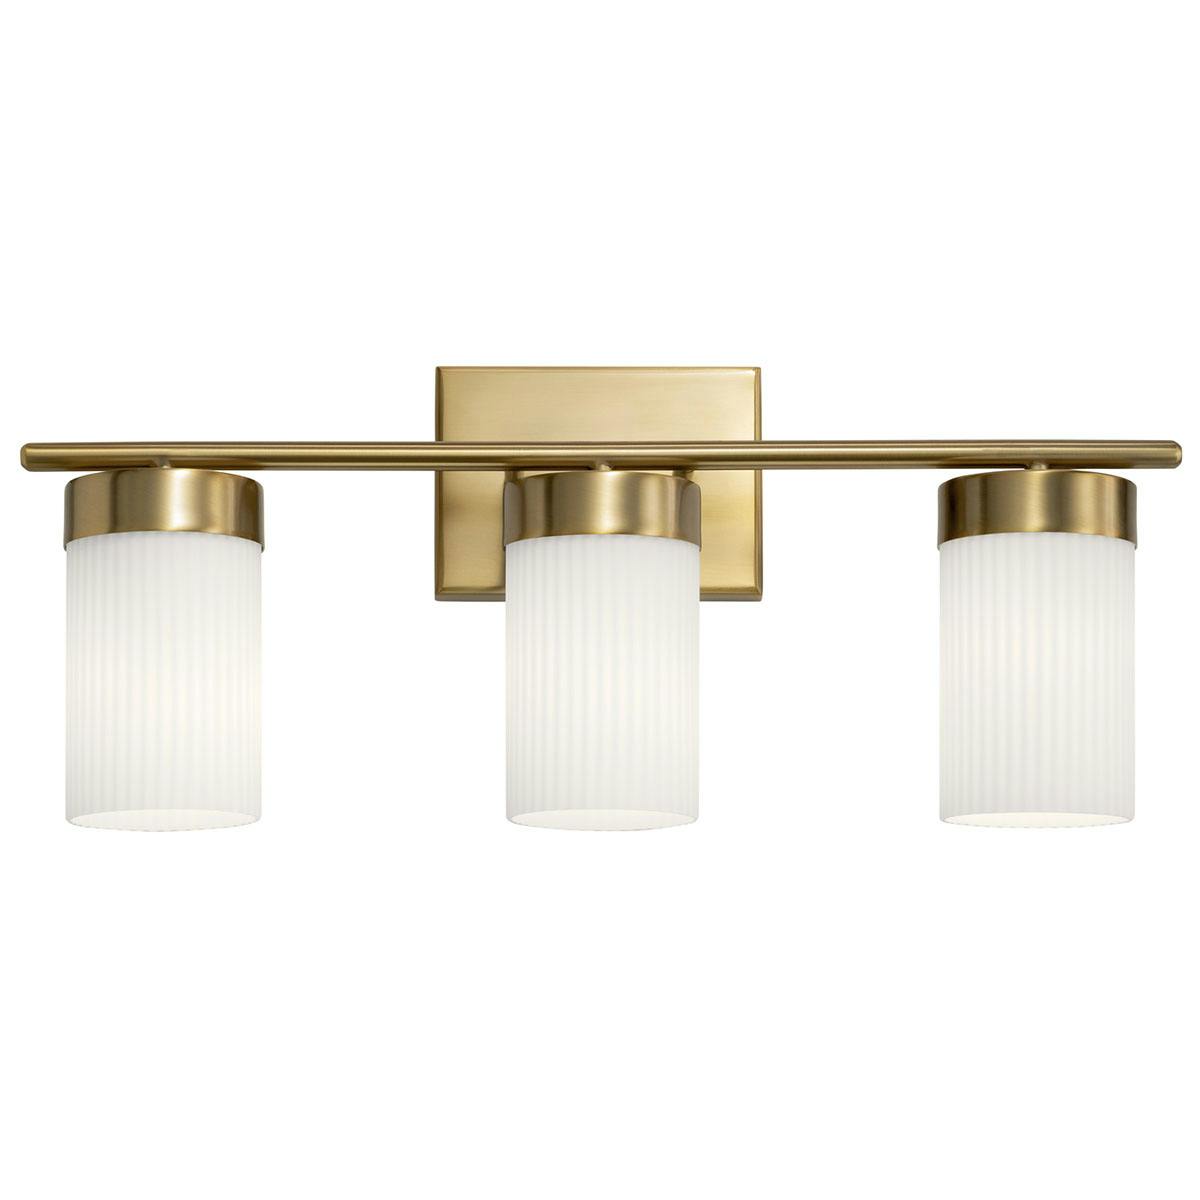 Front view of the Ciona 3 Light Vanity Lighte Brass on a white background